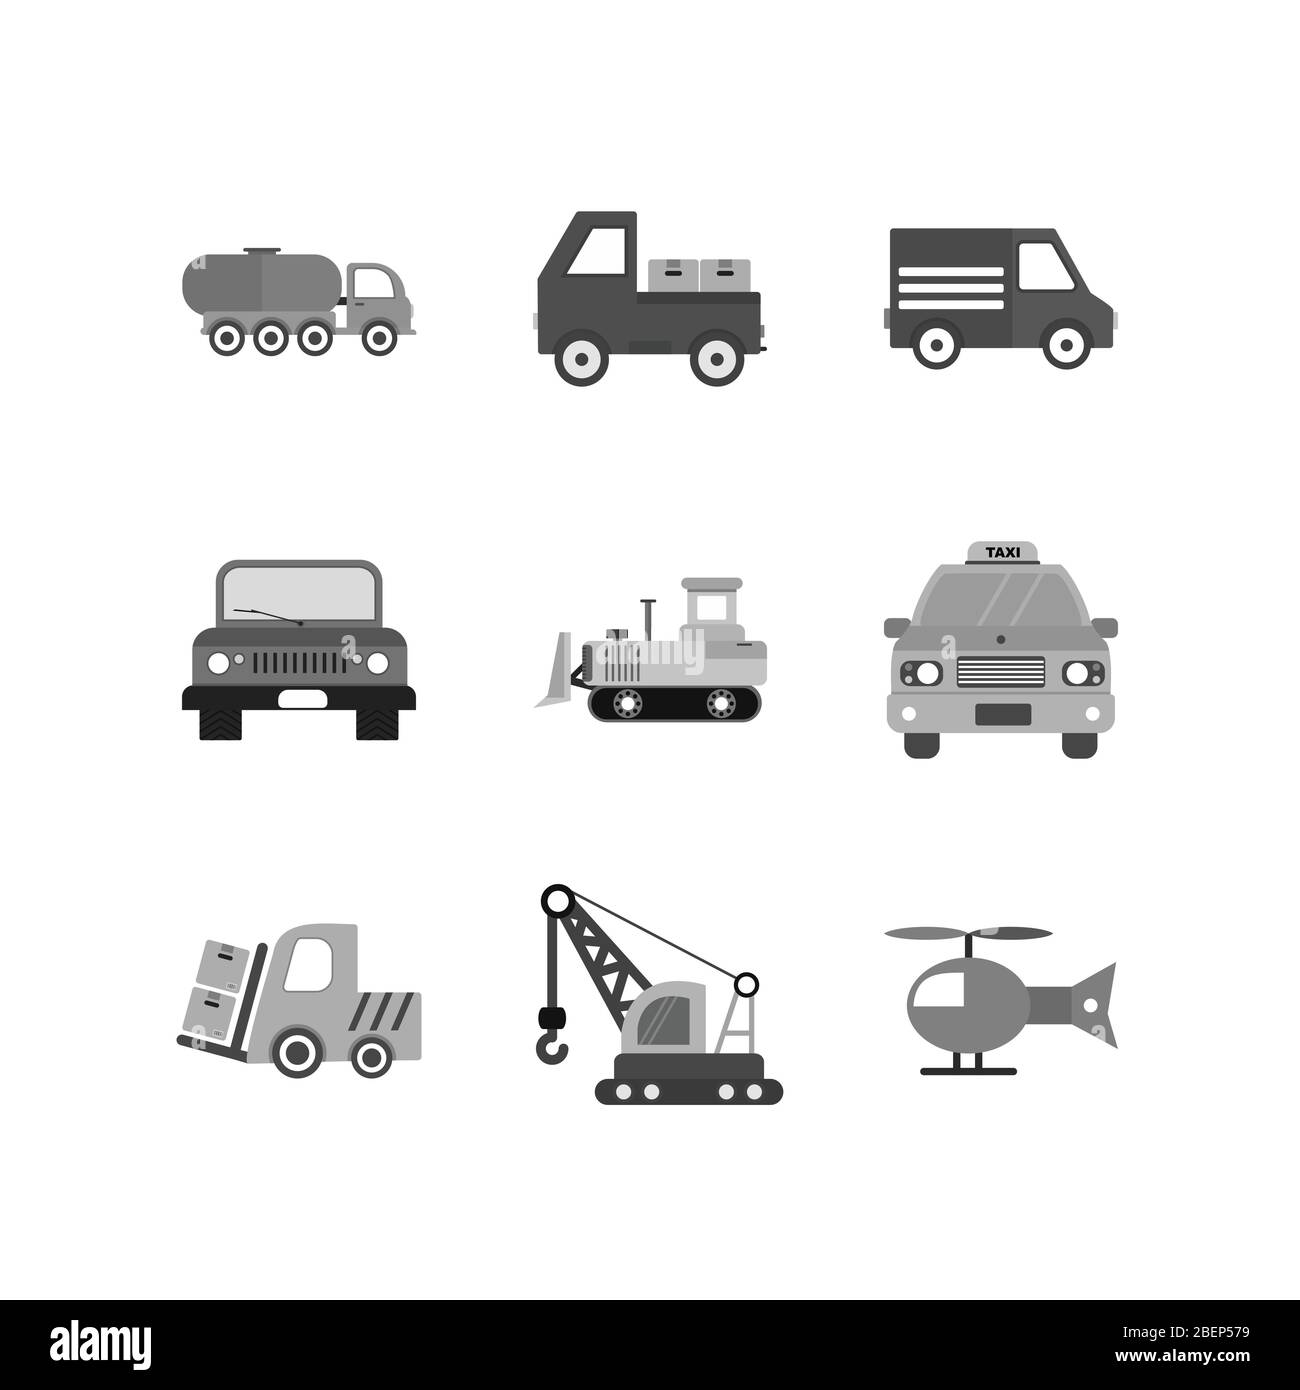 Icon Set Of Transport For Personal And Commercial Use... Stock Photo